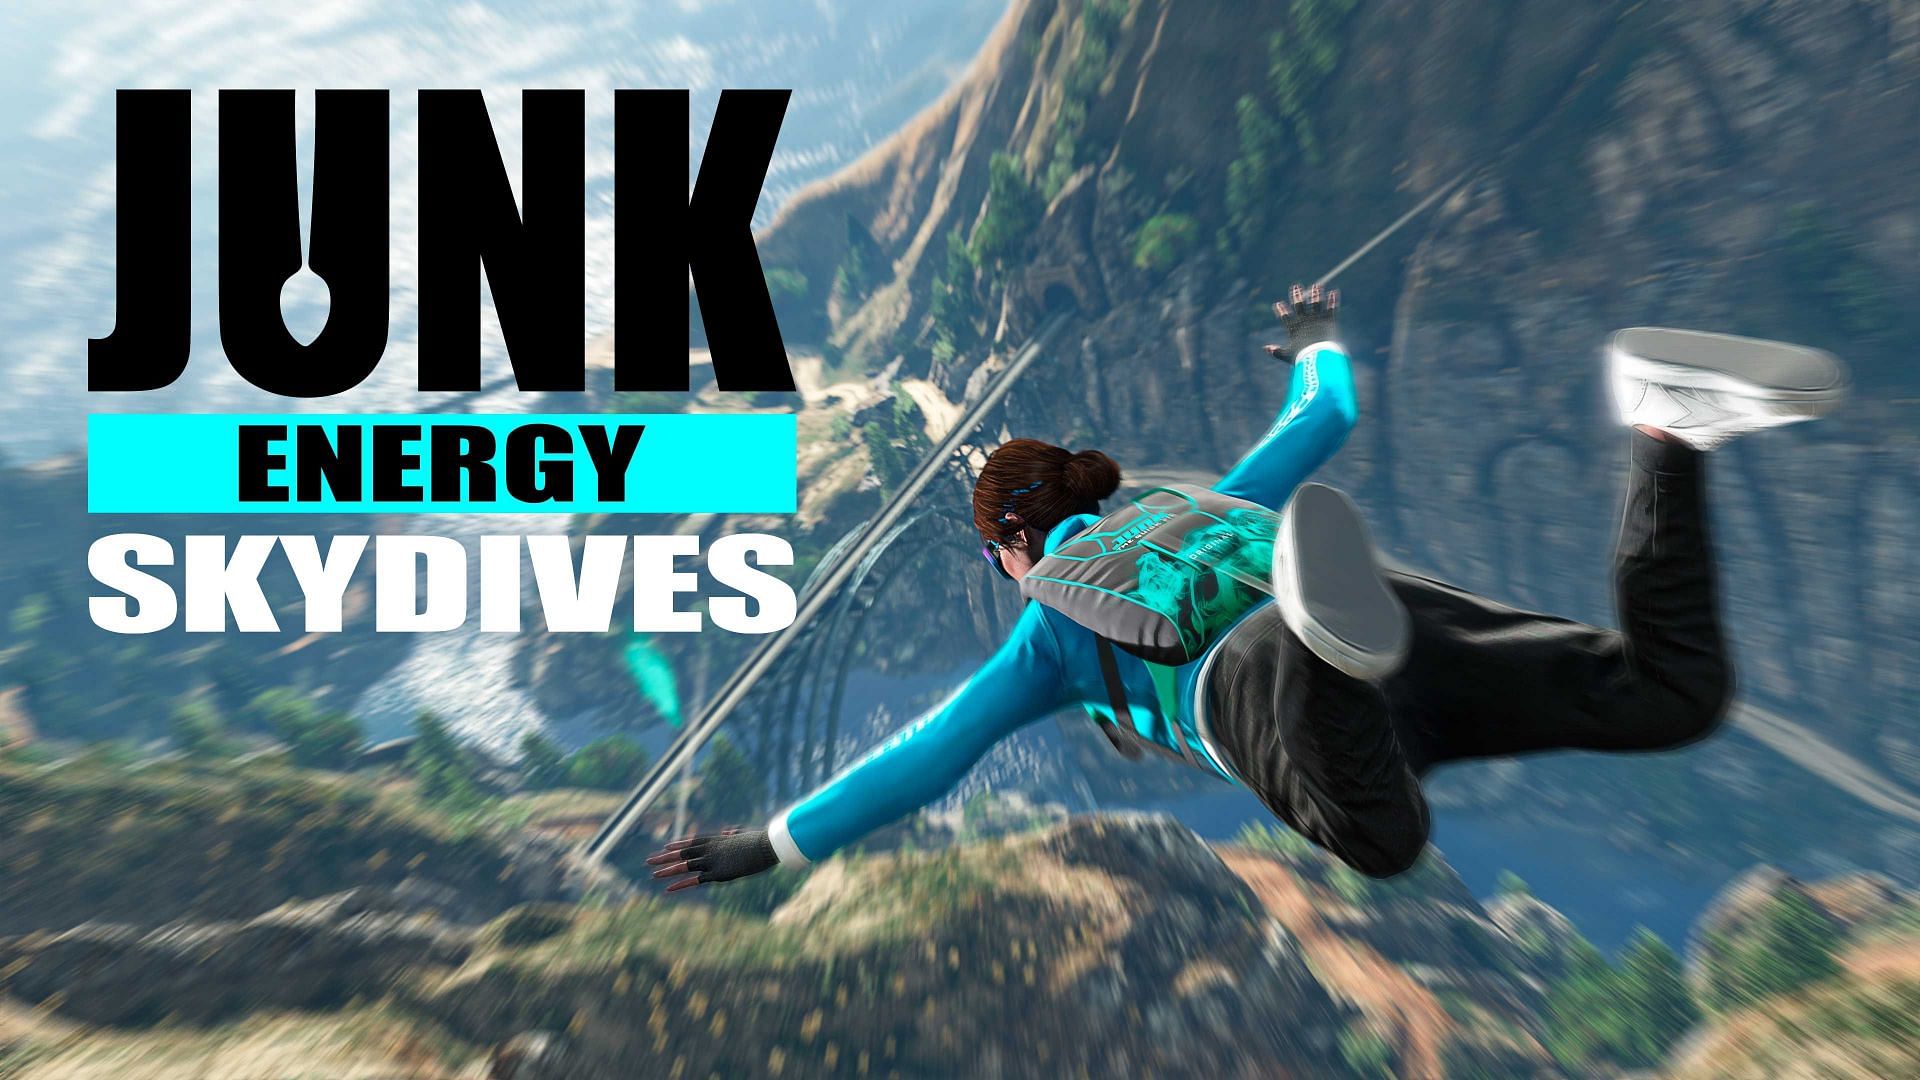 Junk Energy Skydives is a new activity some players might wish to participate in